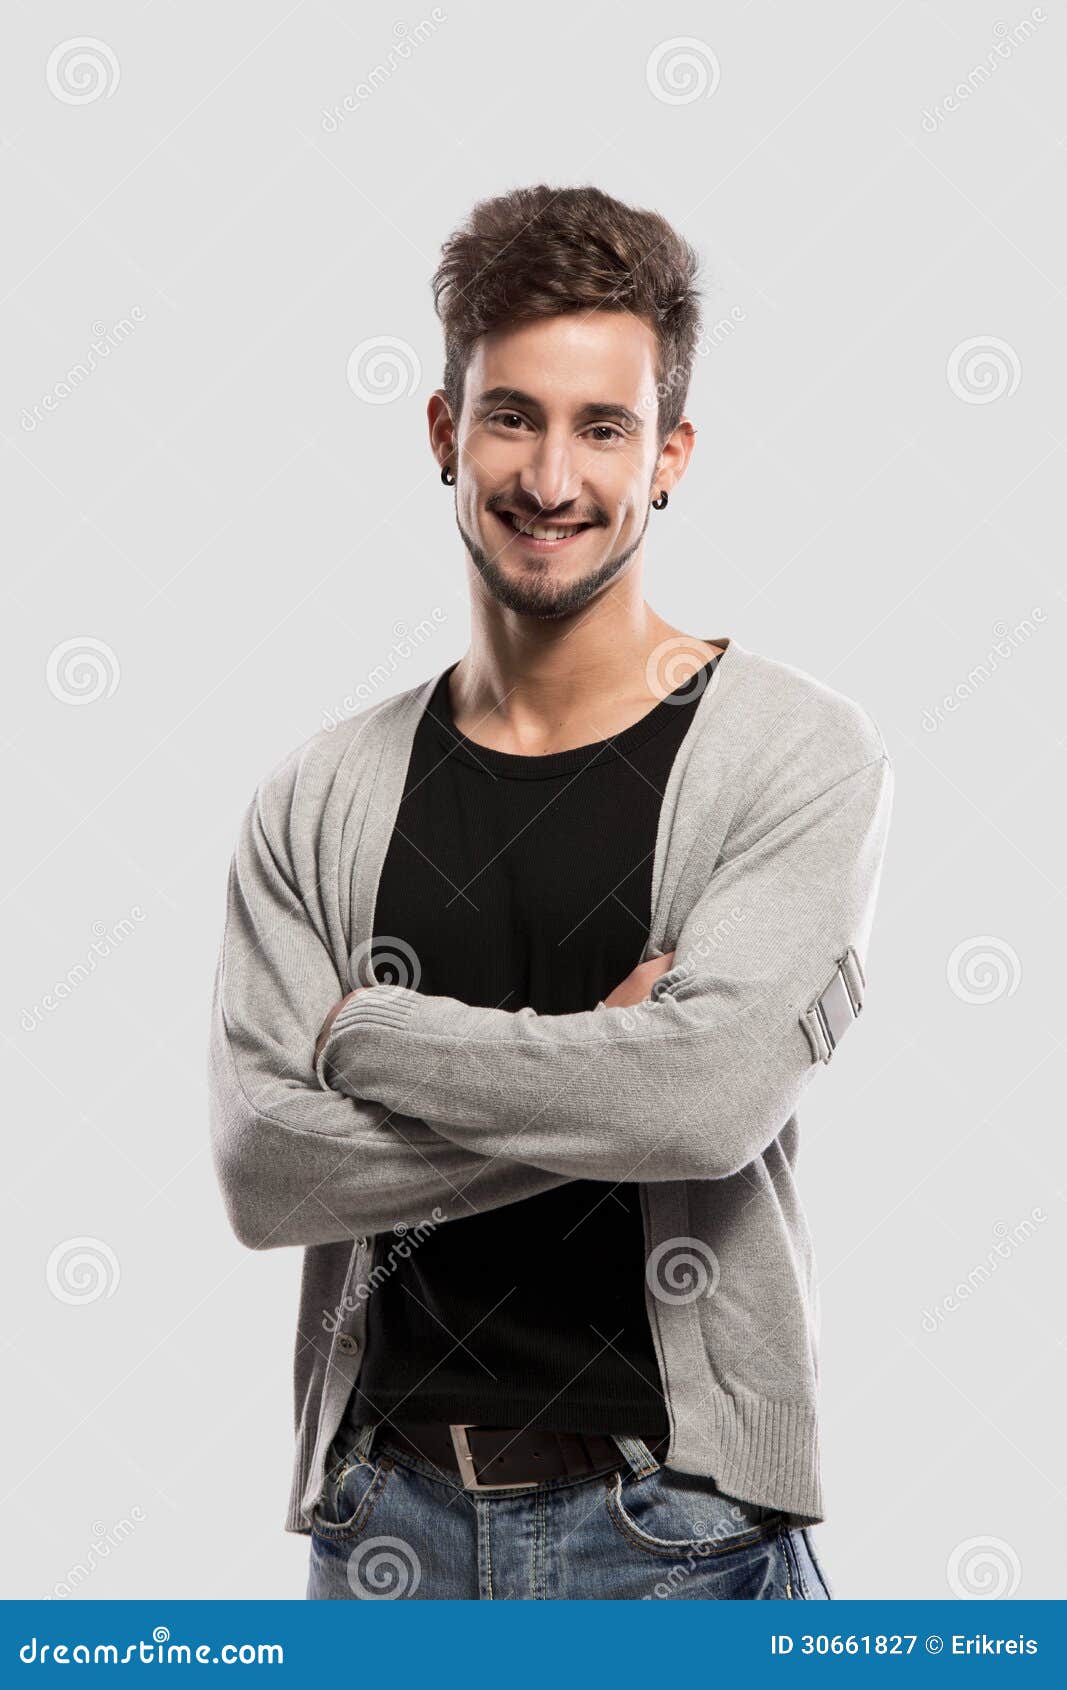 Friendly young man stock image. Image of life, portrait - 30661827